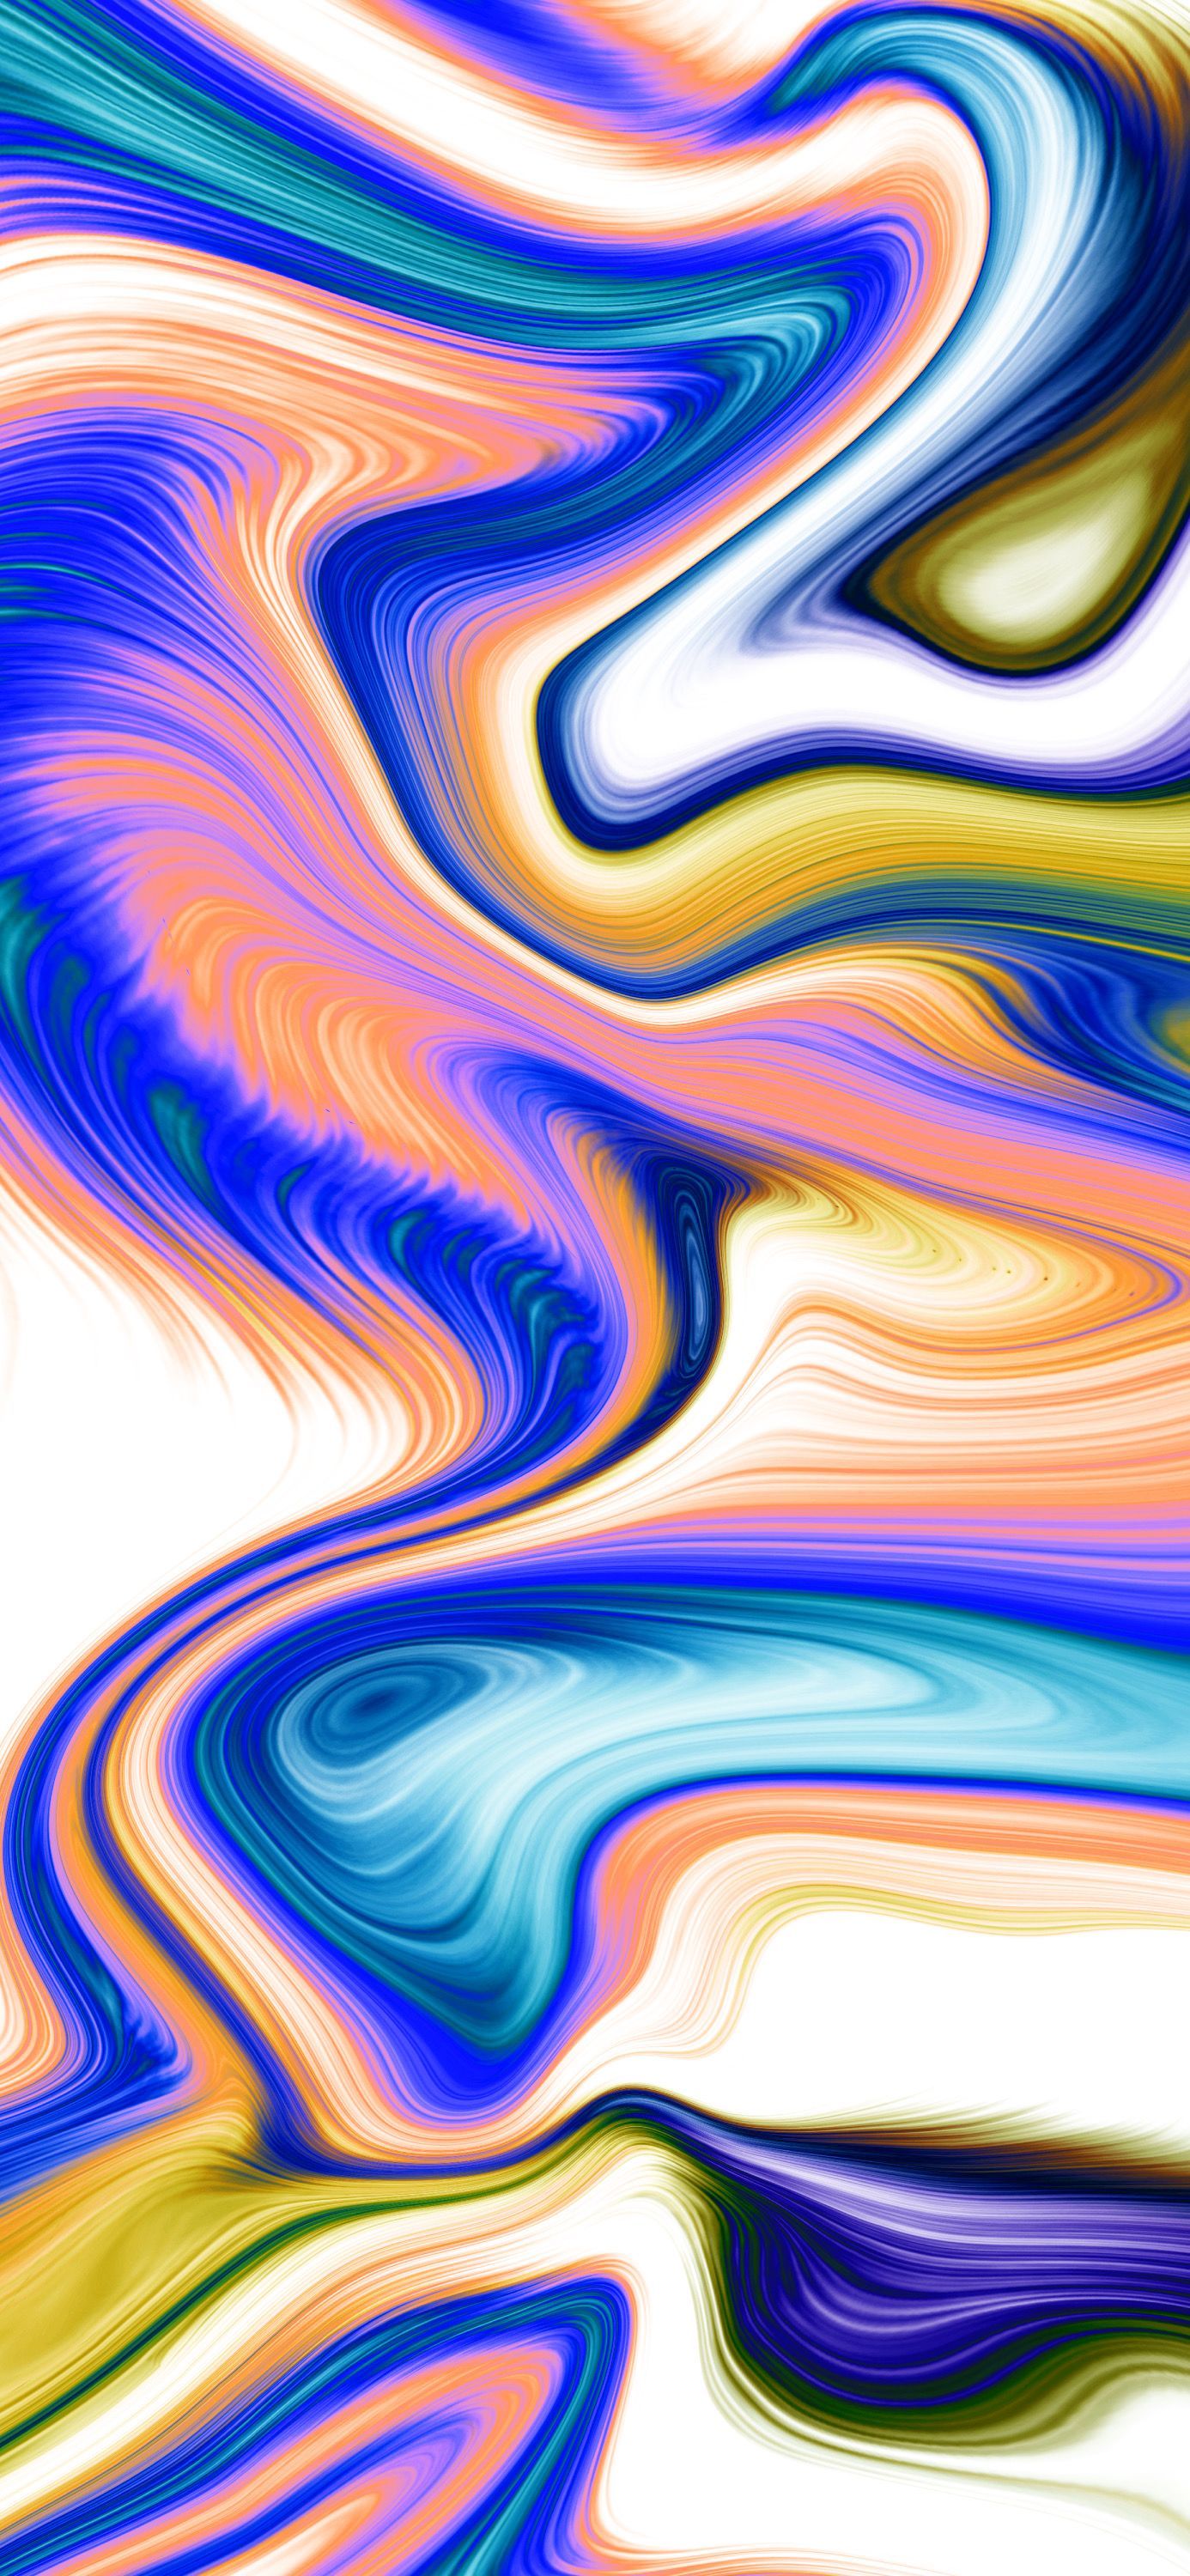 abstract #abstractart #painting #art #artistwork #modernart #illustration # wavy #lines #stains #co. Abstract wallpaper, Colorful wallpaper, Wallpaper background